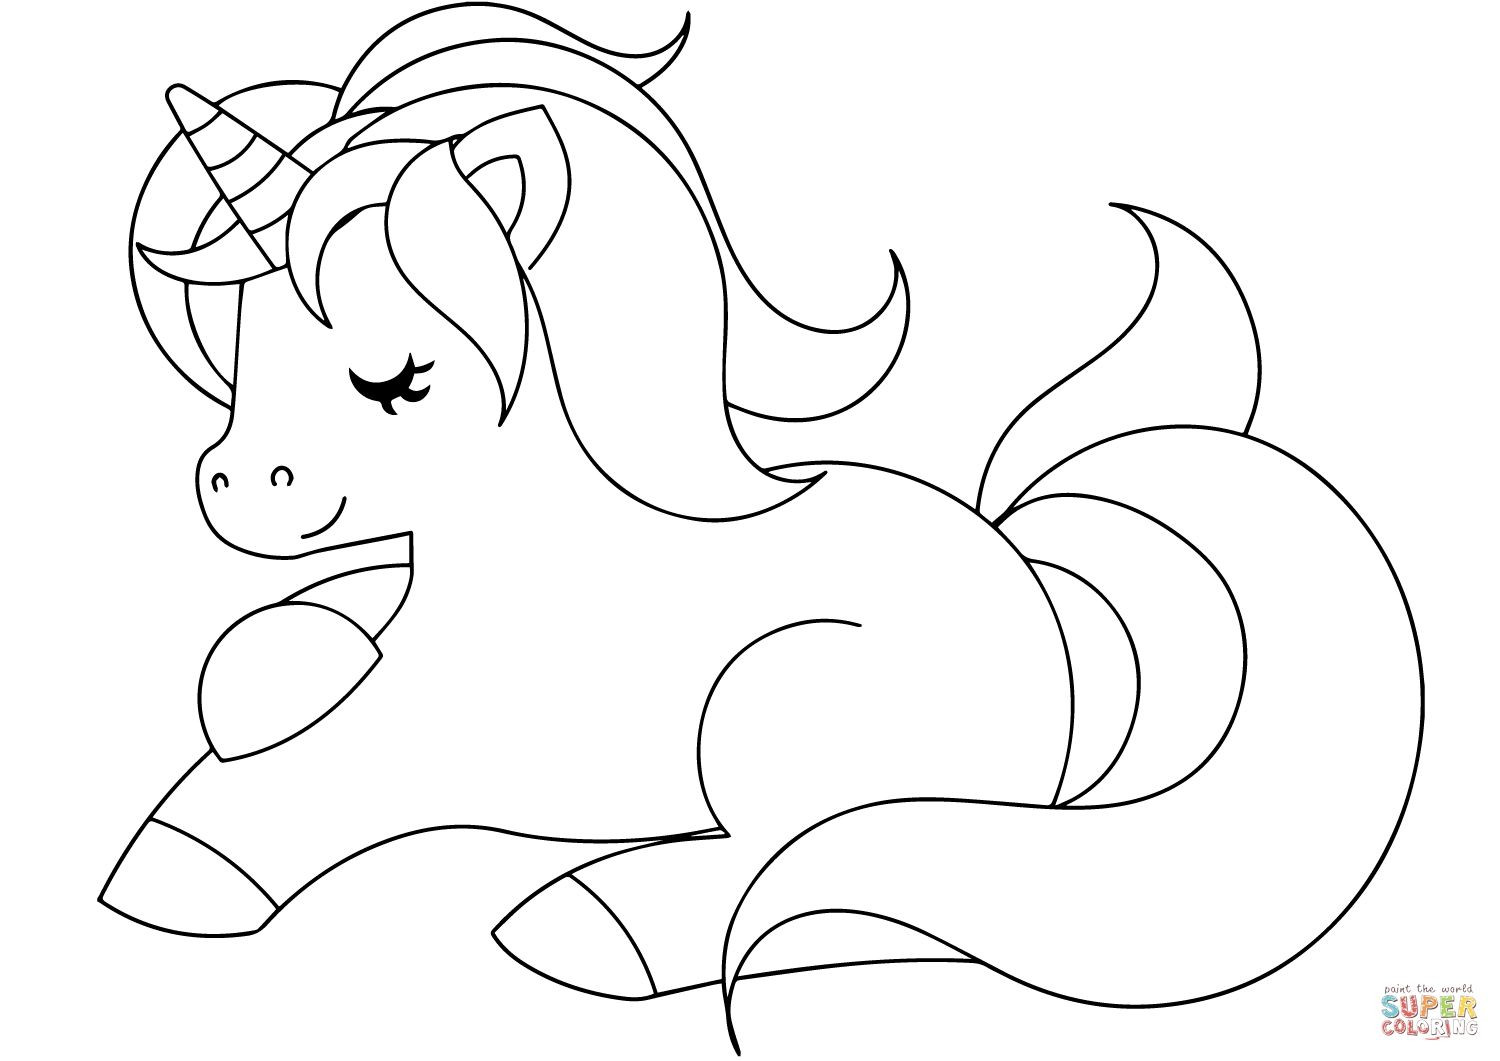 Cute Unicorn Coloring Pages For Kids
 Cute Unicorn Coloring Page